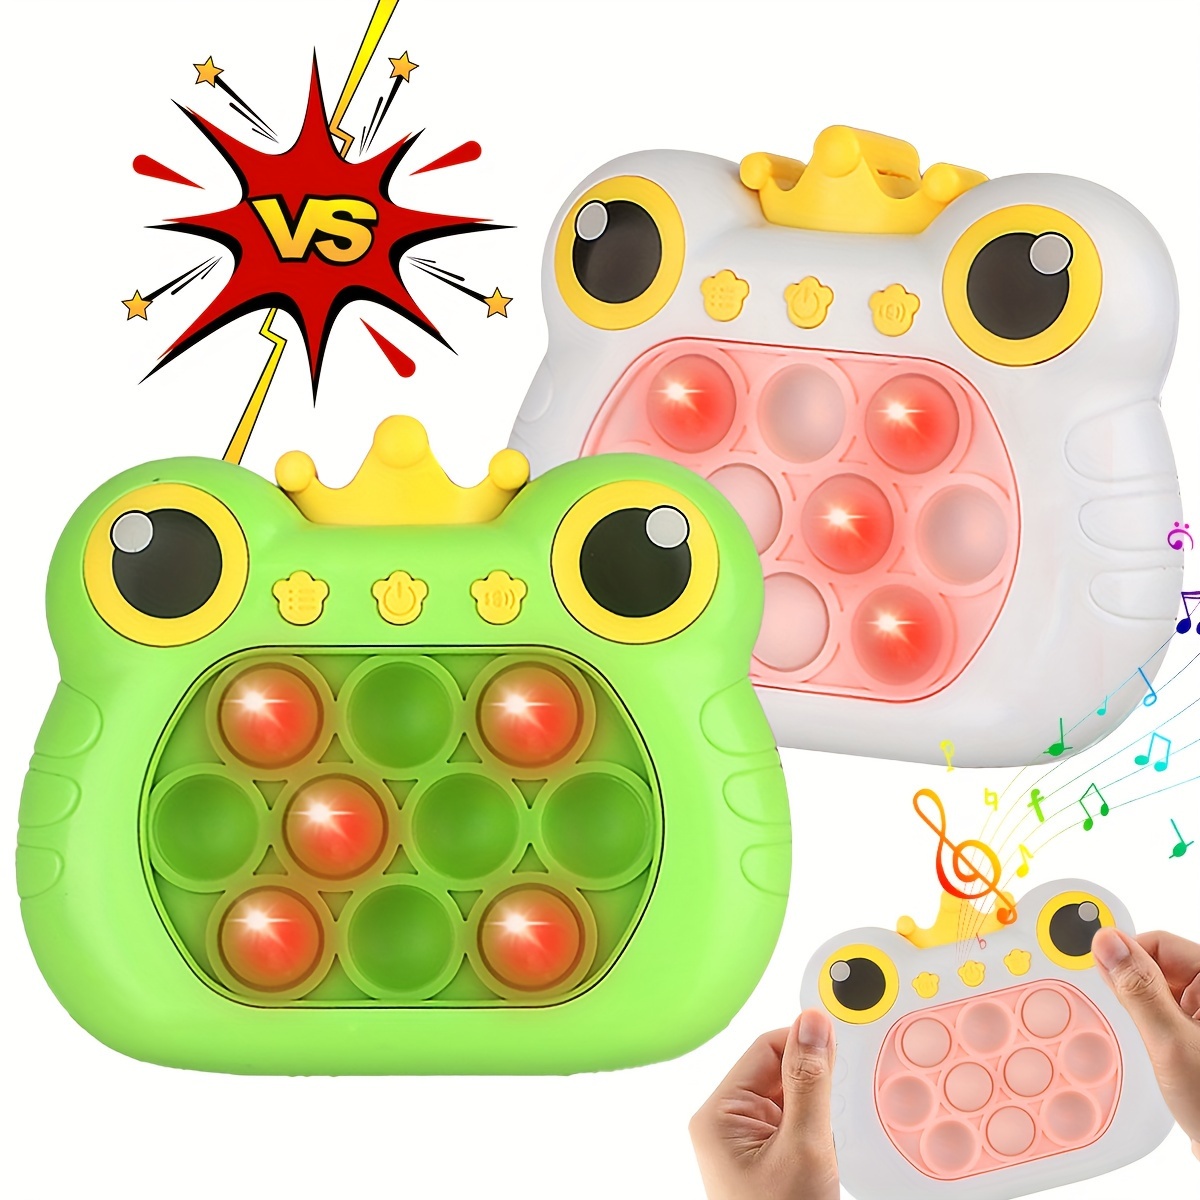  Pop Fidget Toy It Game, Pop Pro It, Push Bubble Stress Light-Up  Toys, Popits for Kids, Pattern-Popping Game, 4 Modes, 30 Levels,  Anti-Anxiety Autism Squeeze Sensory Toy for Children Adults, Light